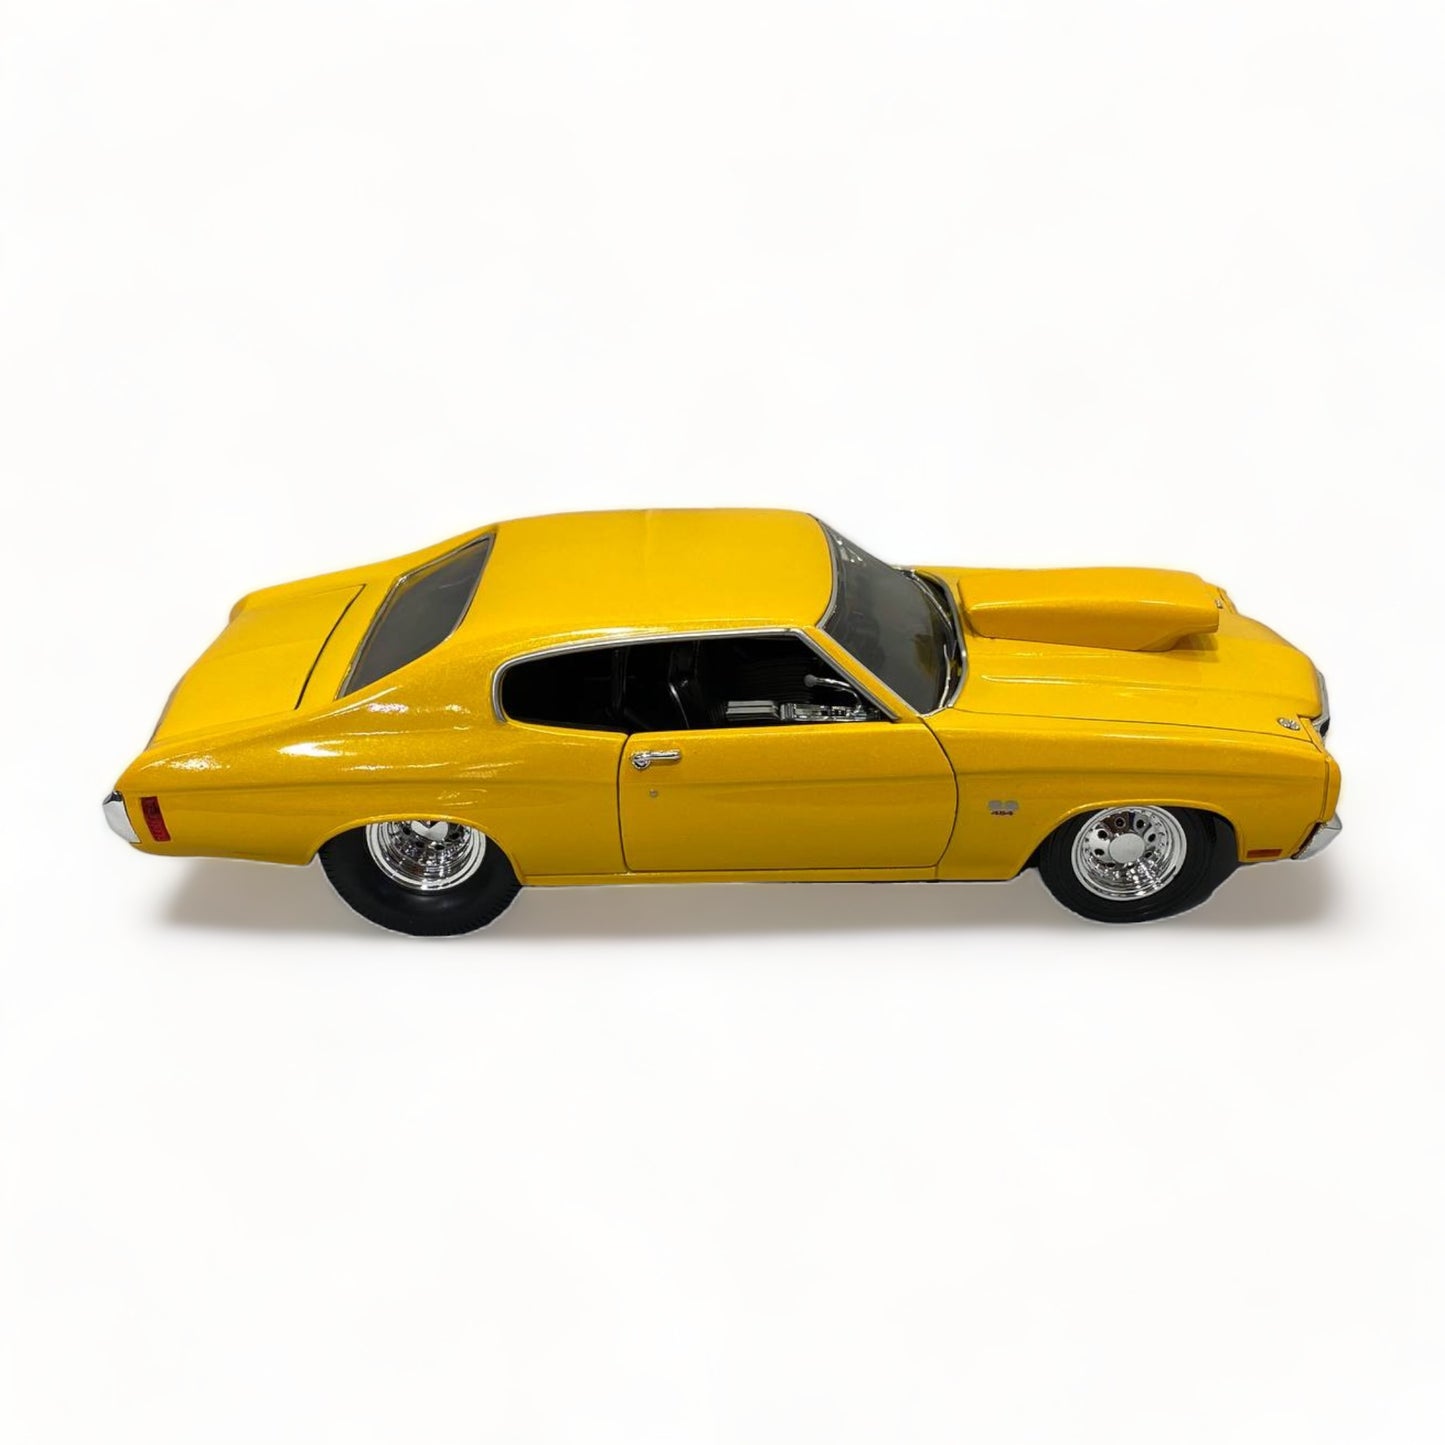 Welly Chevrolet CHEVELLE PRO STREET YELLOW